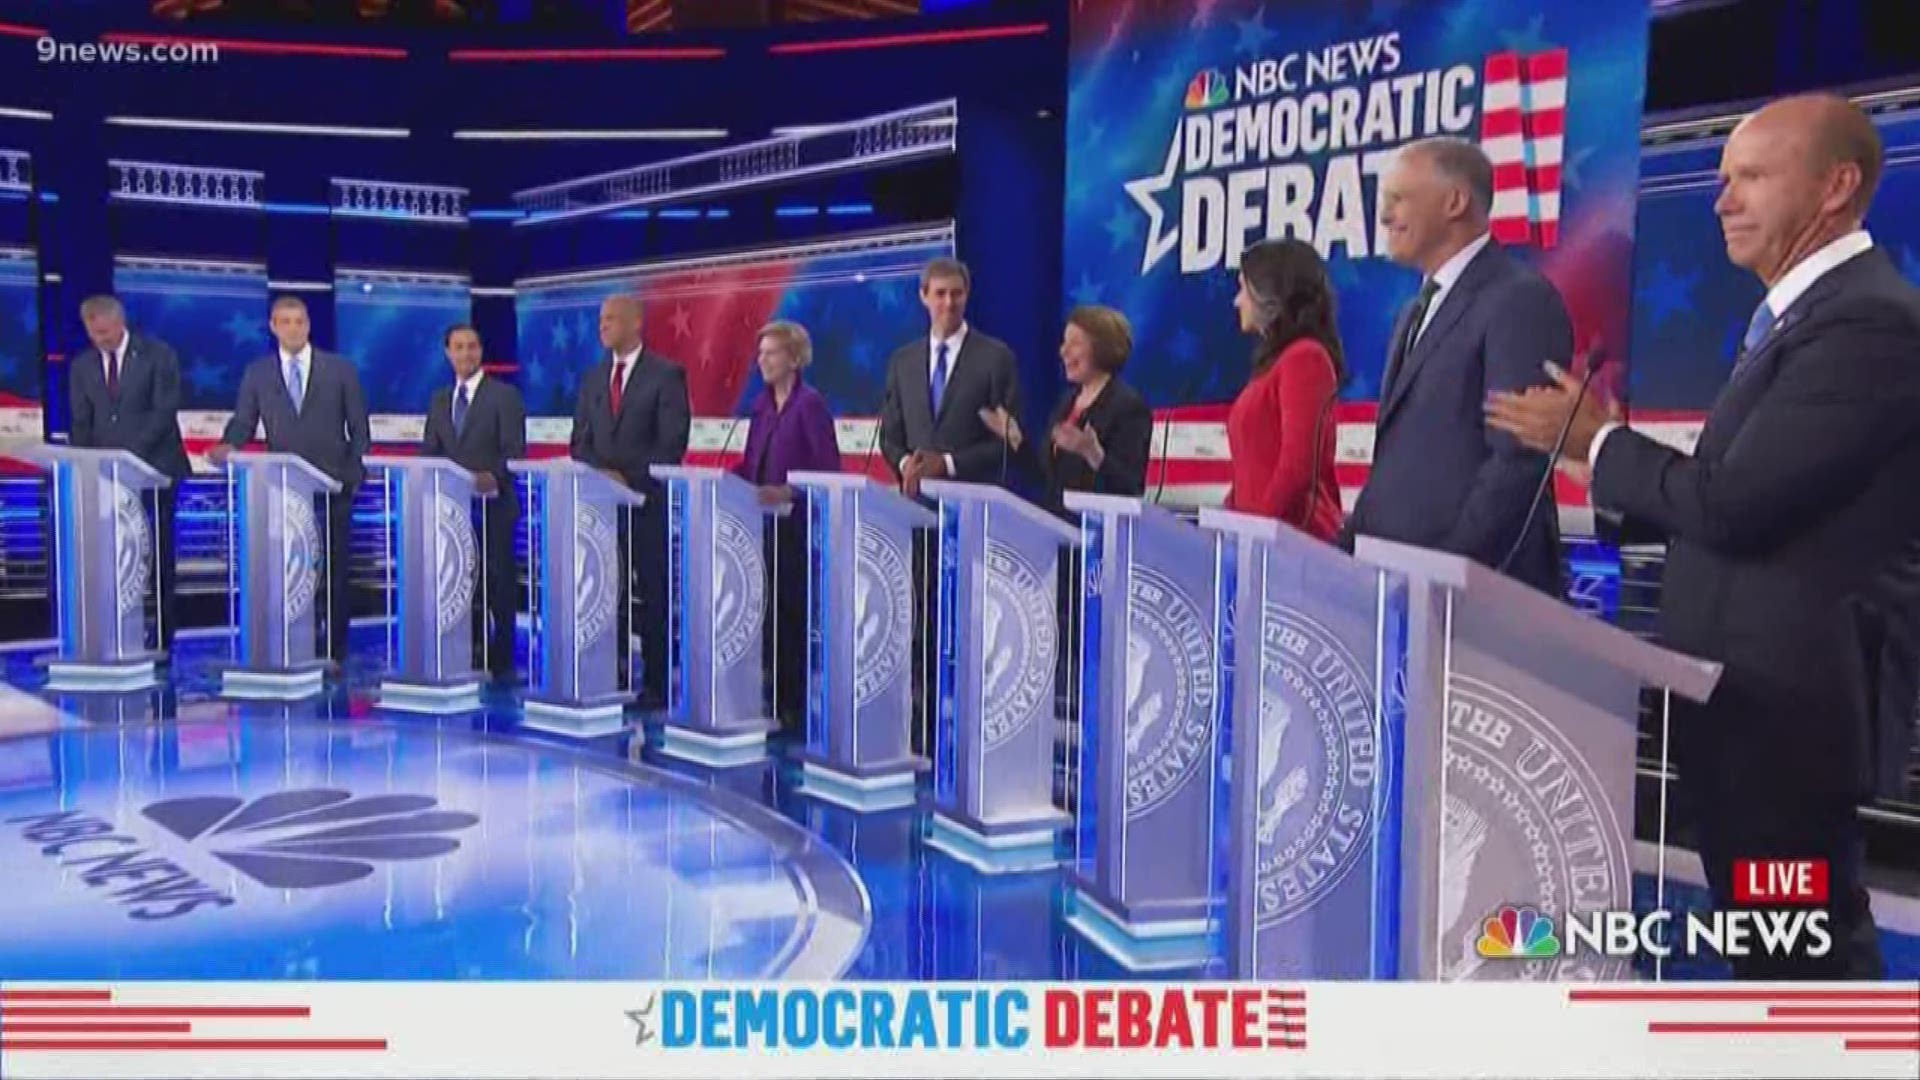 A crowded field of Democrats piled on to the debate stage in Miami Wednesday for the first night of two presidential debates.